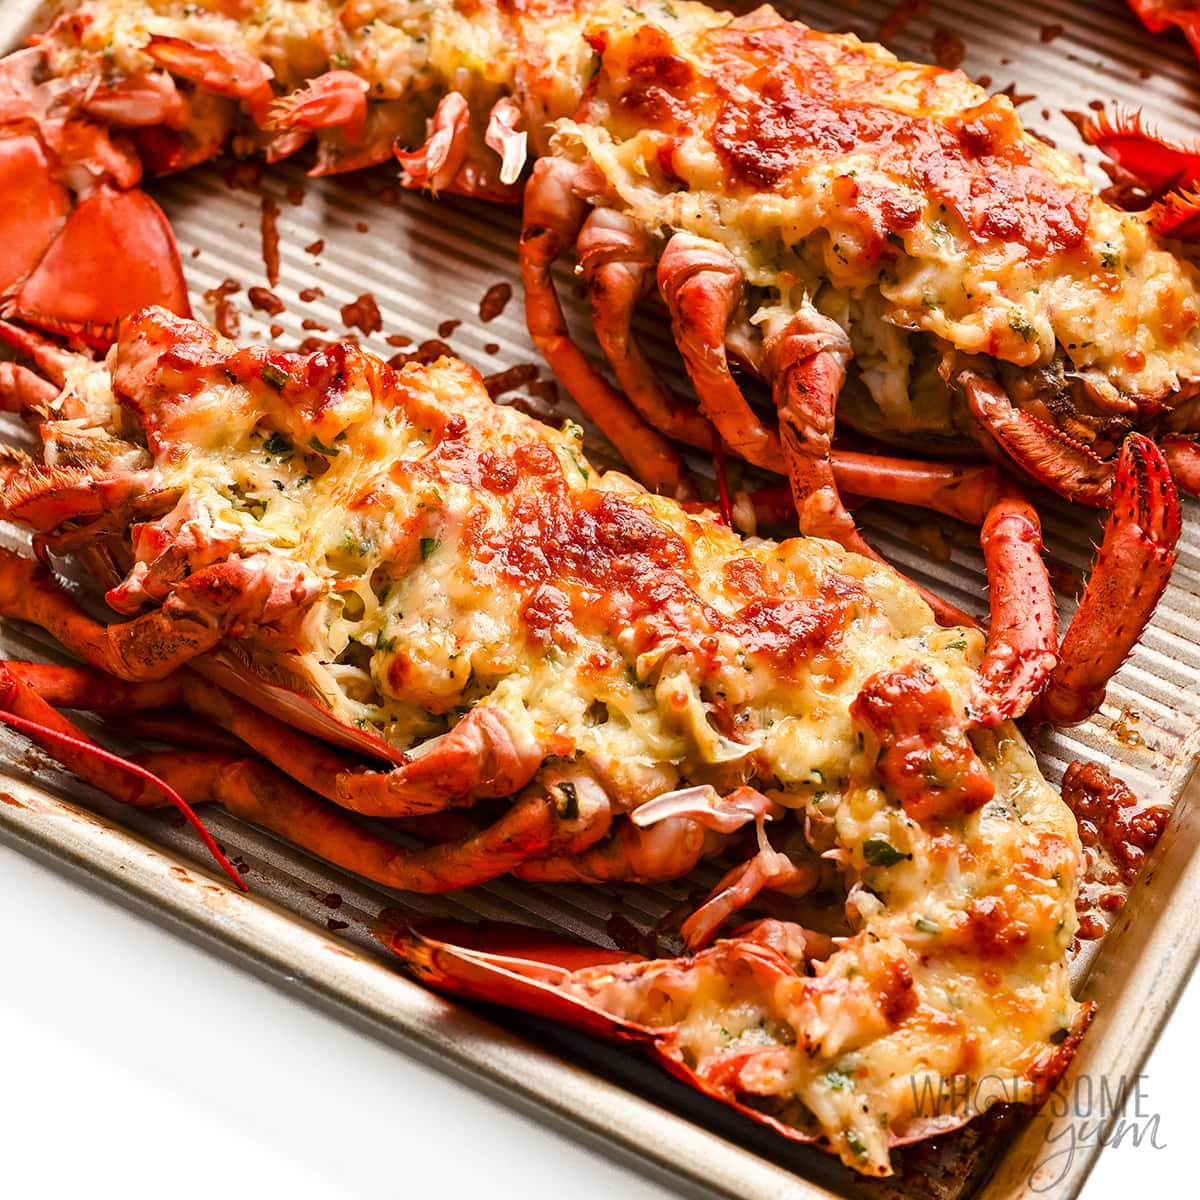 Broiled lobster Thermidor on a sheet pan.